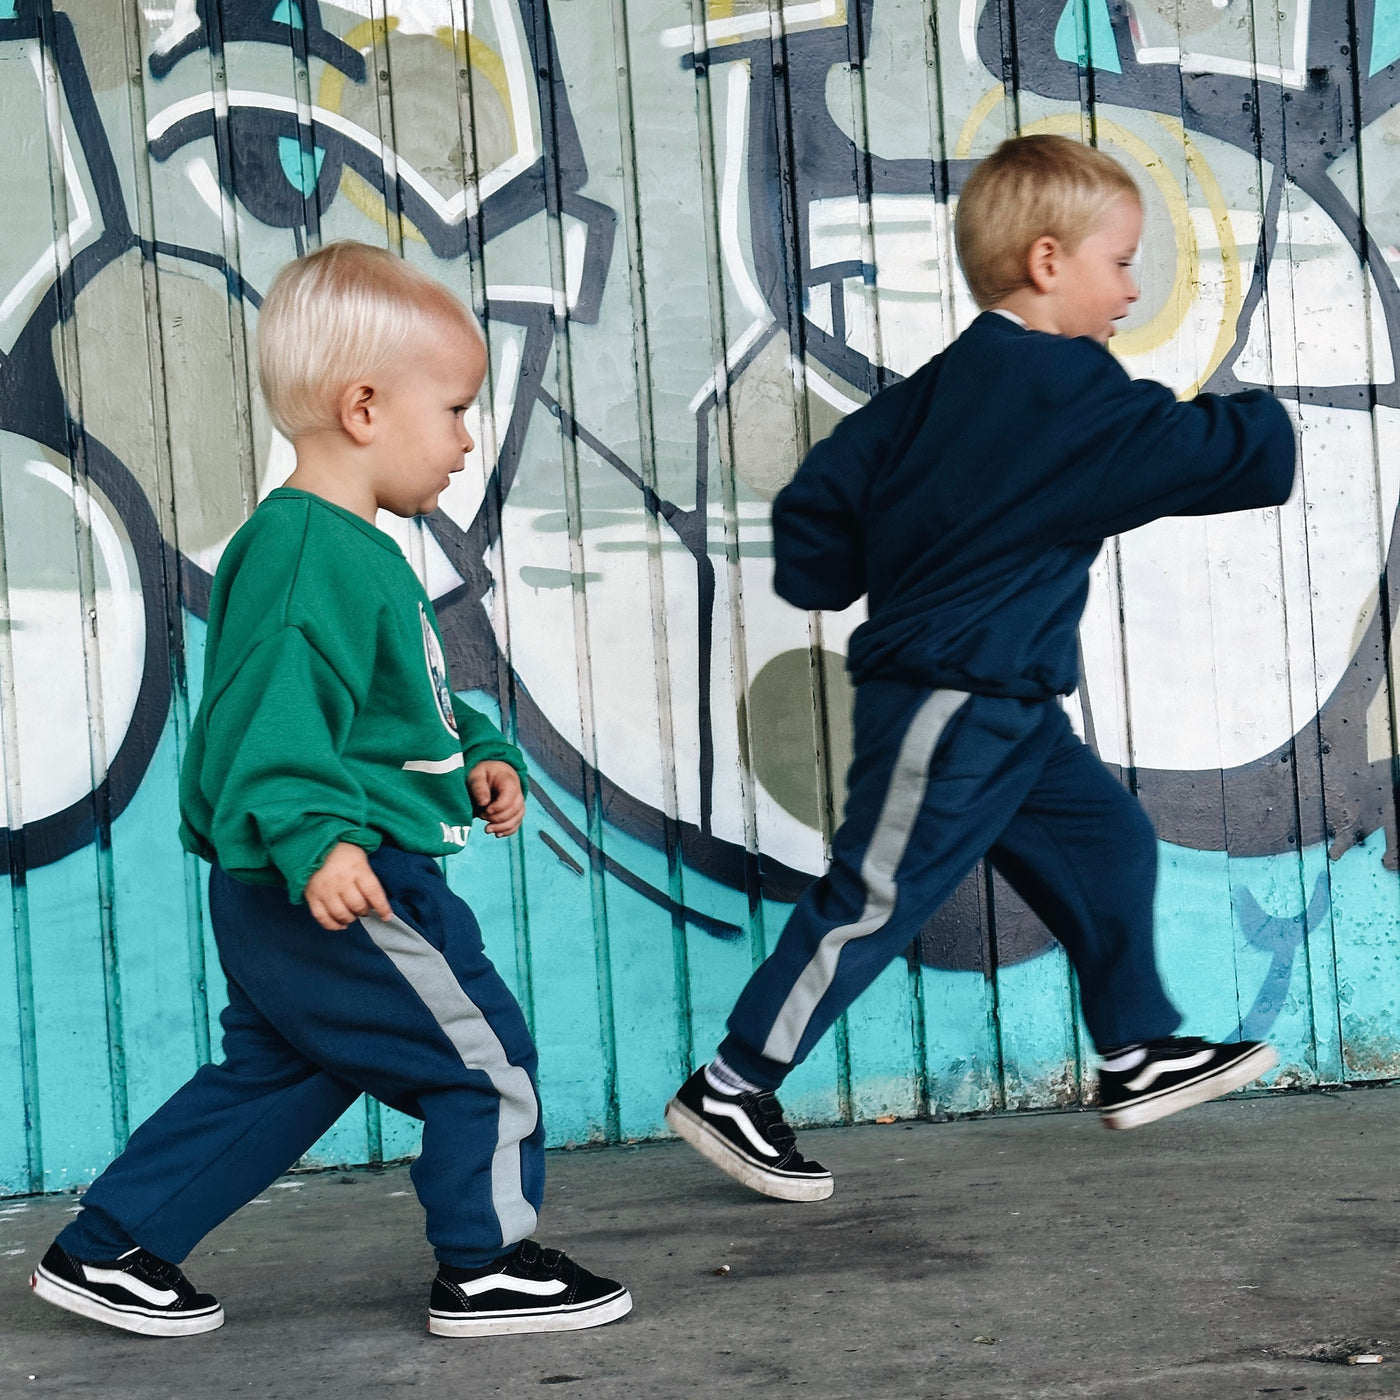 We Are Kids - Jogger Charles fleece midnight blue / 2-3y & 6-7y